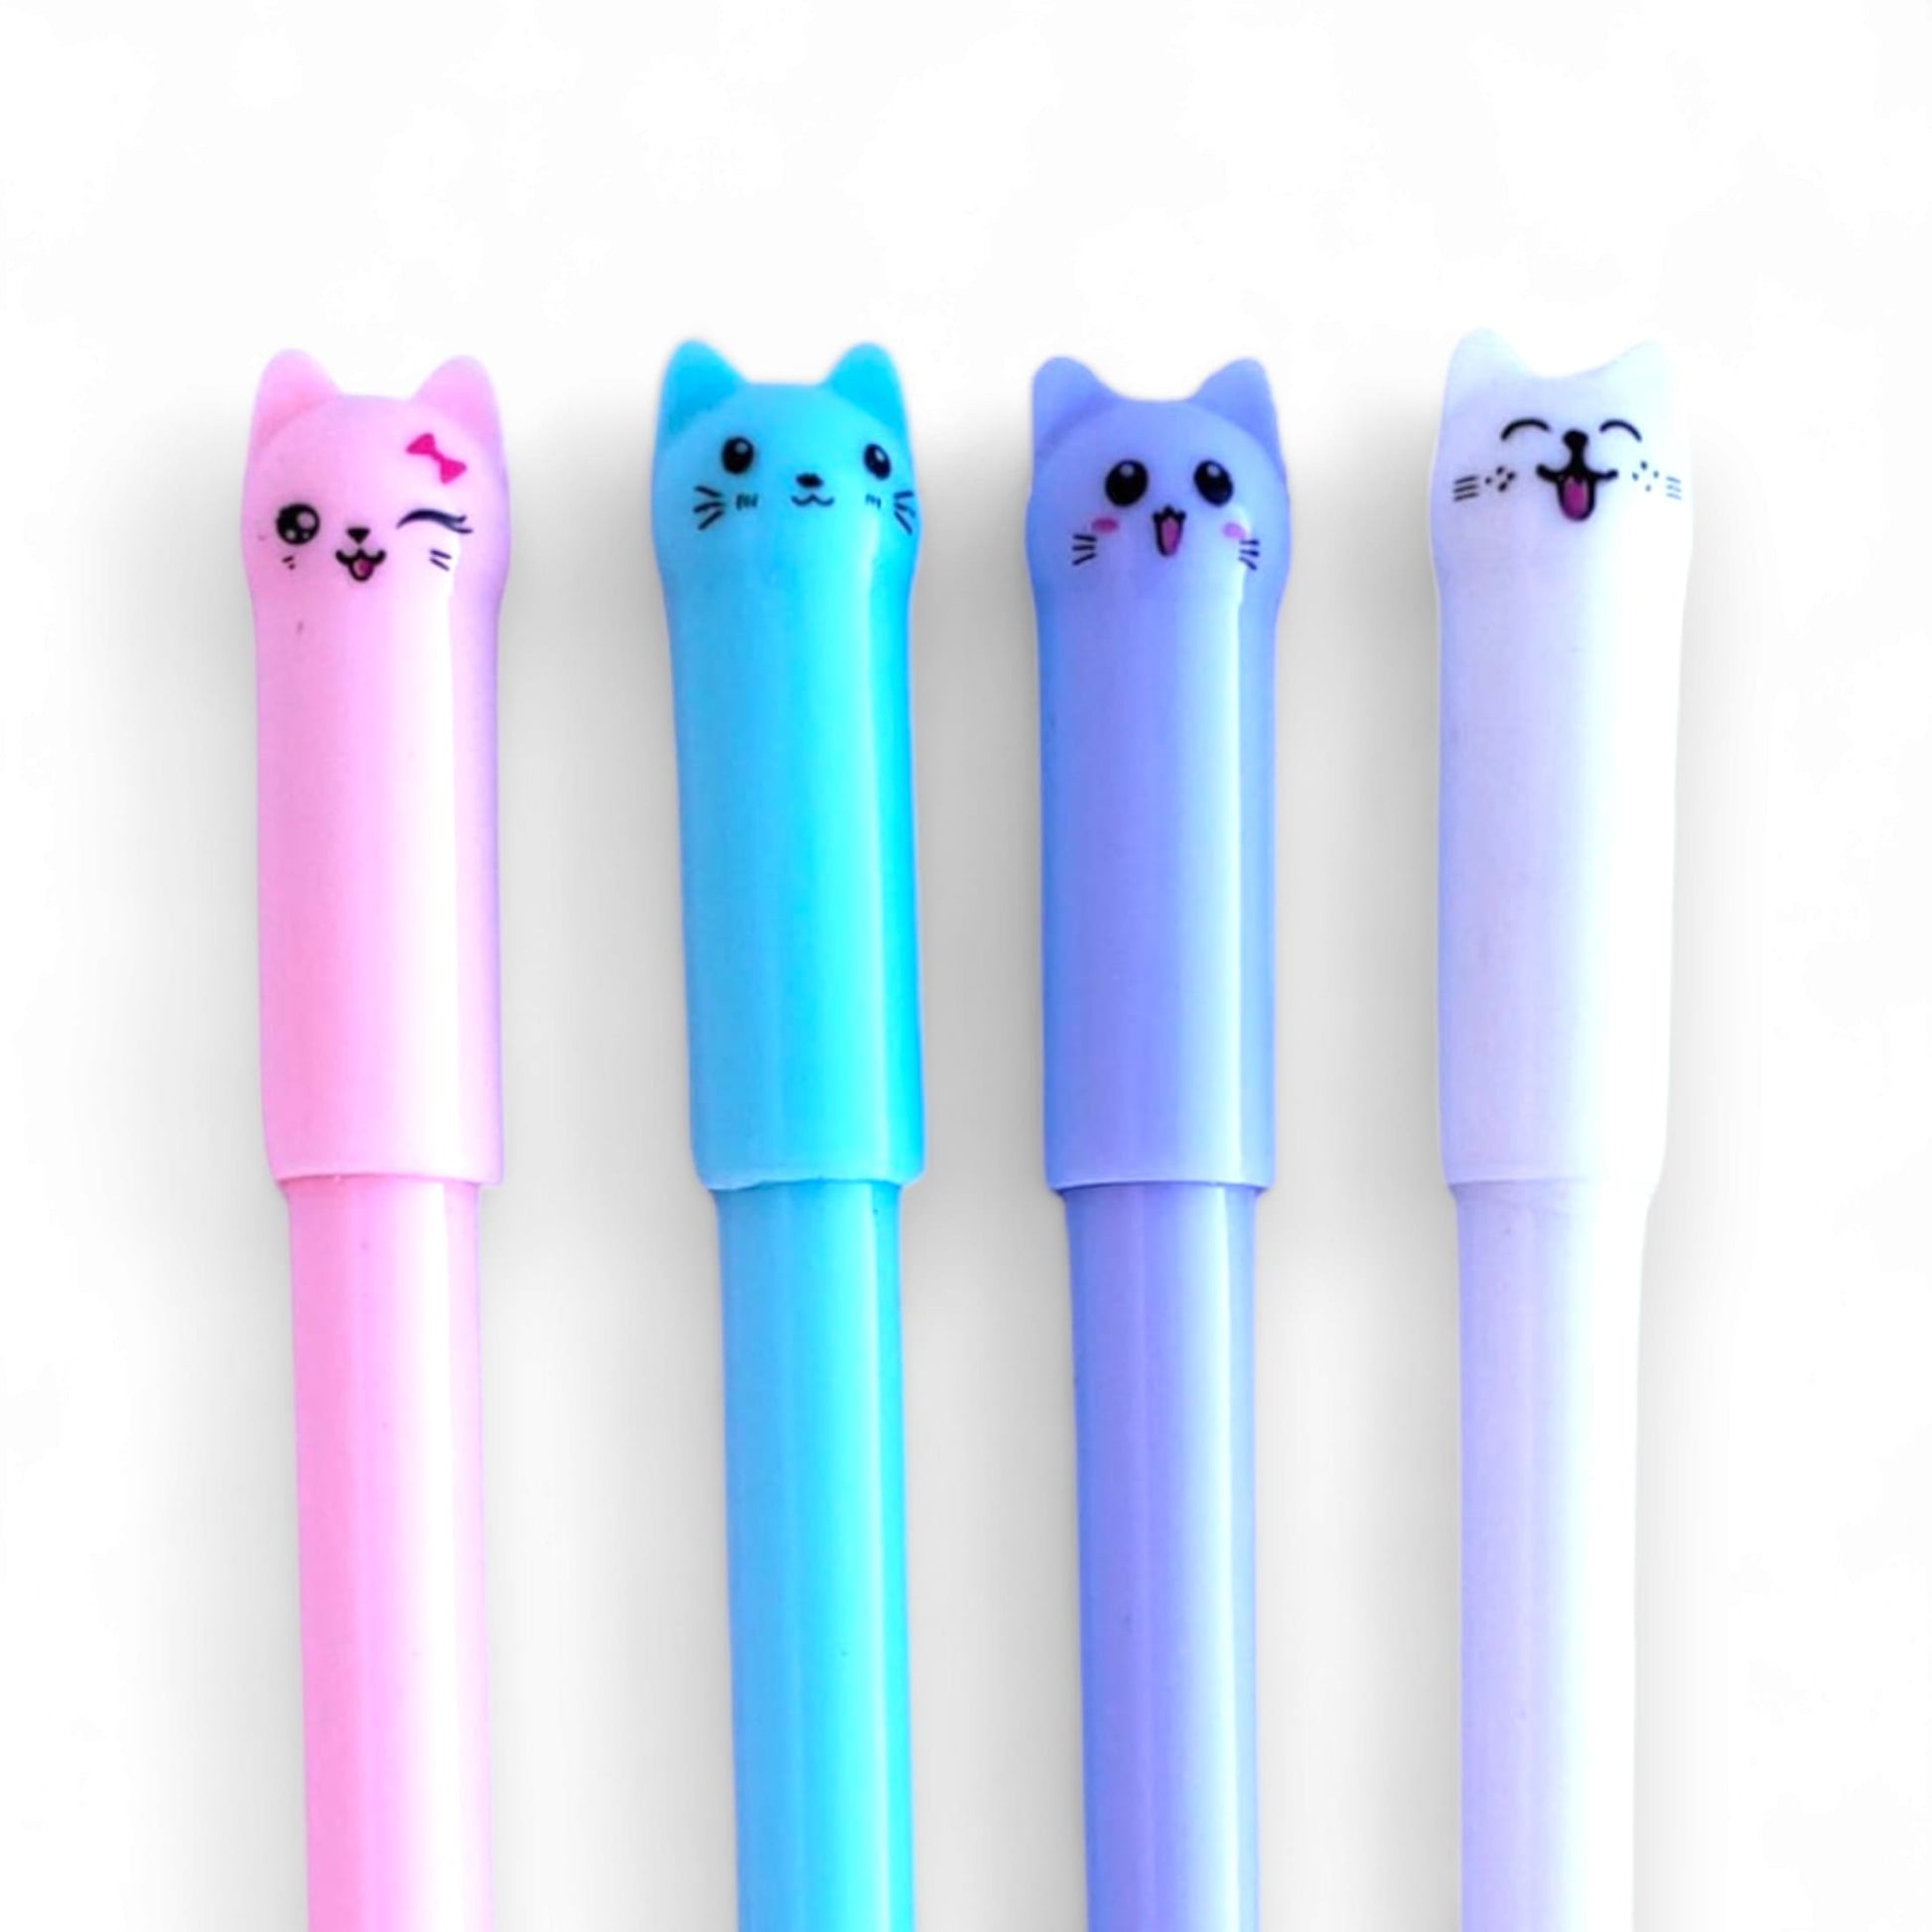 Colorful Kitty Gel Pen Set of 4 from Confetti Kitty, Only 2.49